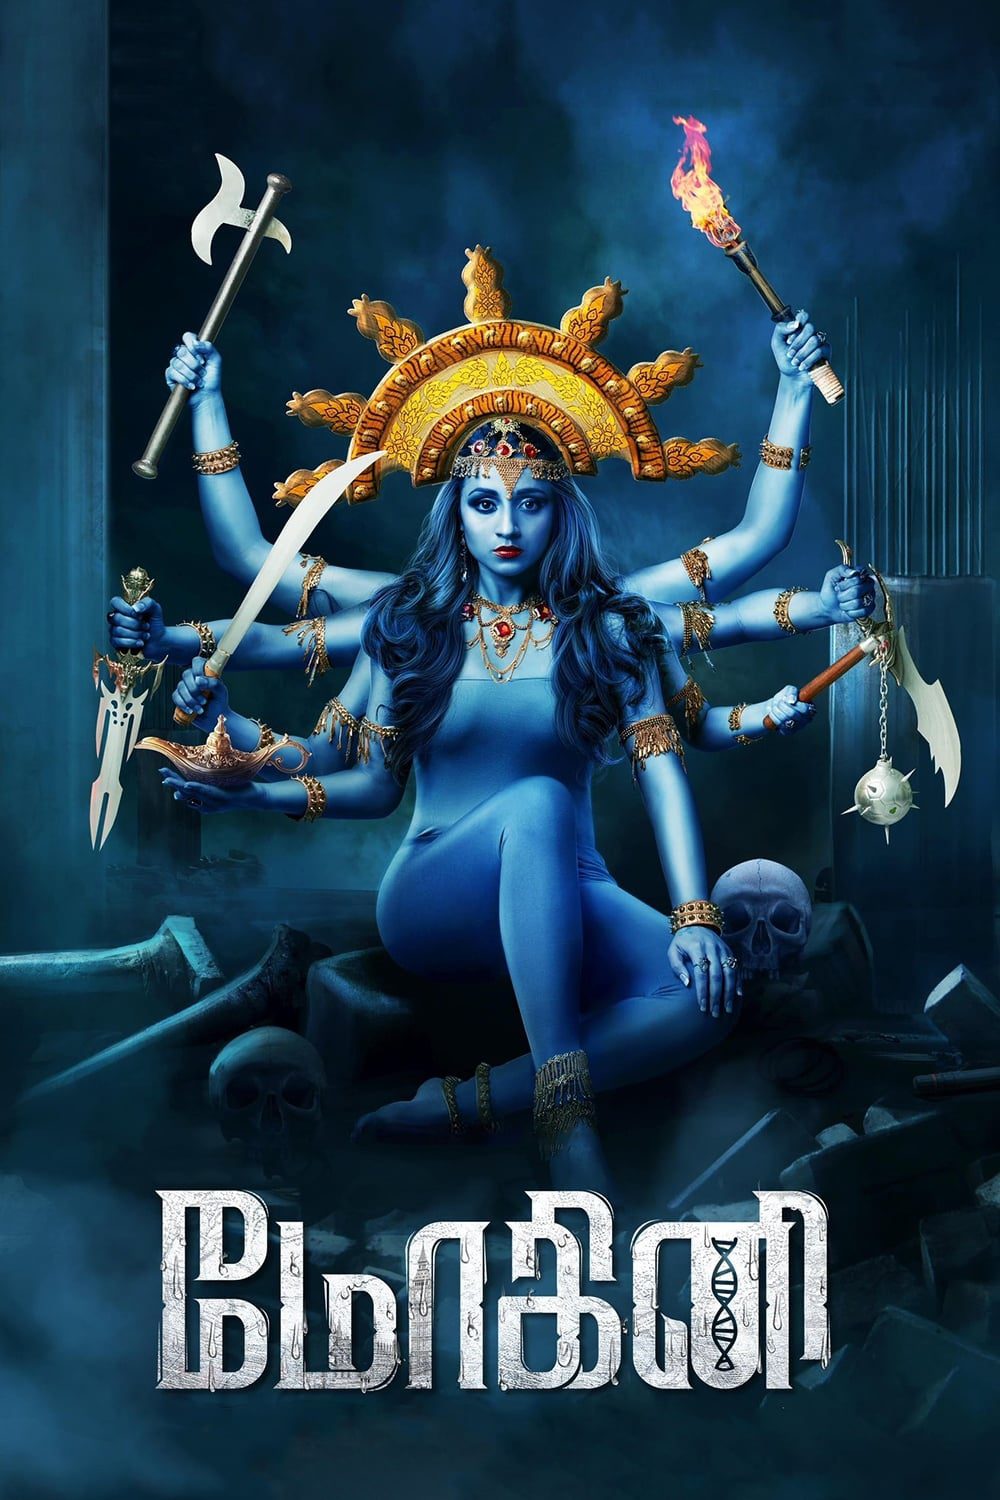 Poster for the movie "Mohini"